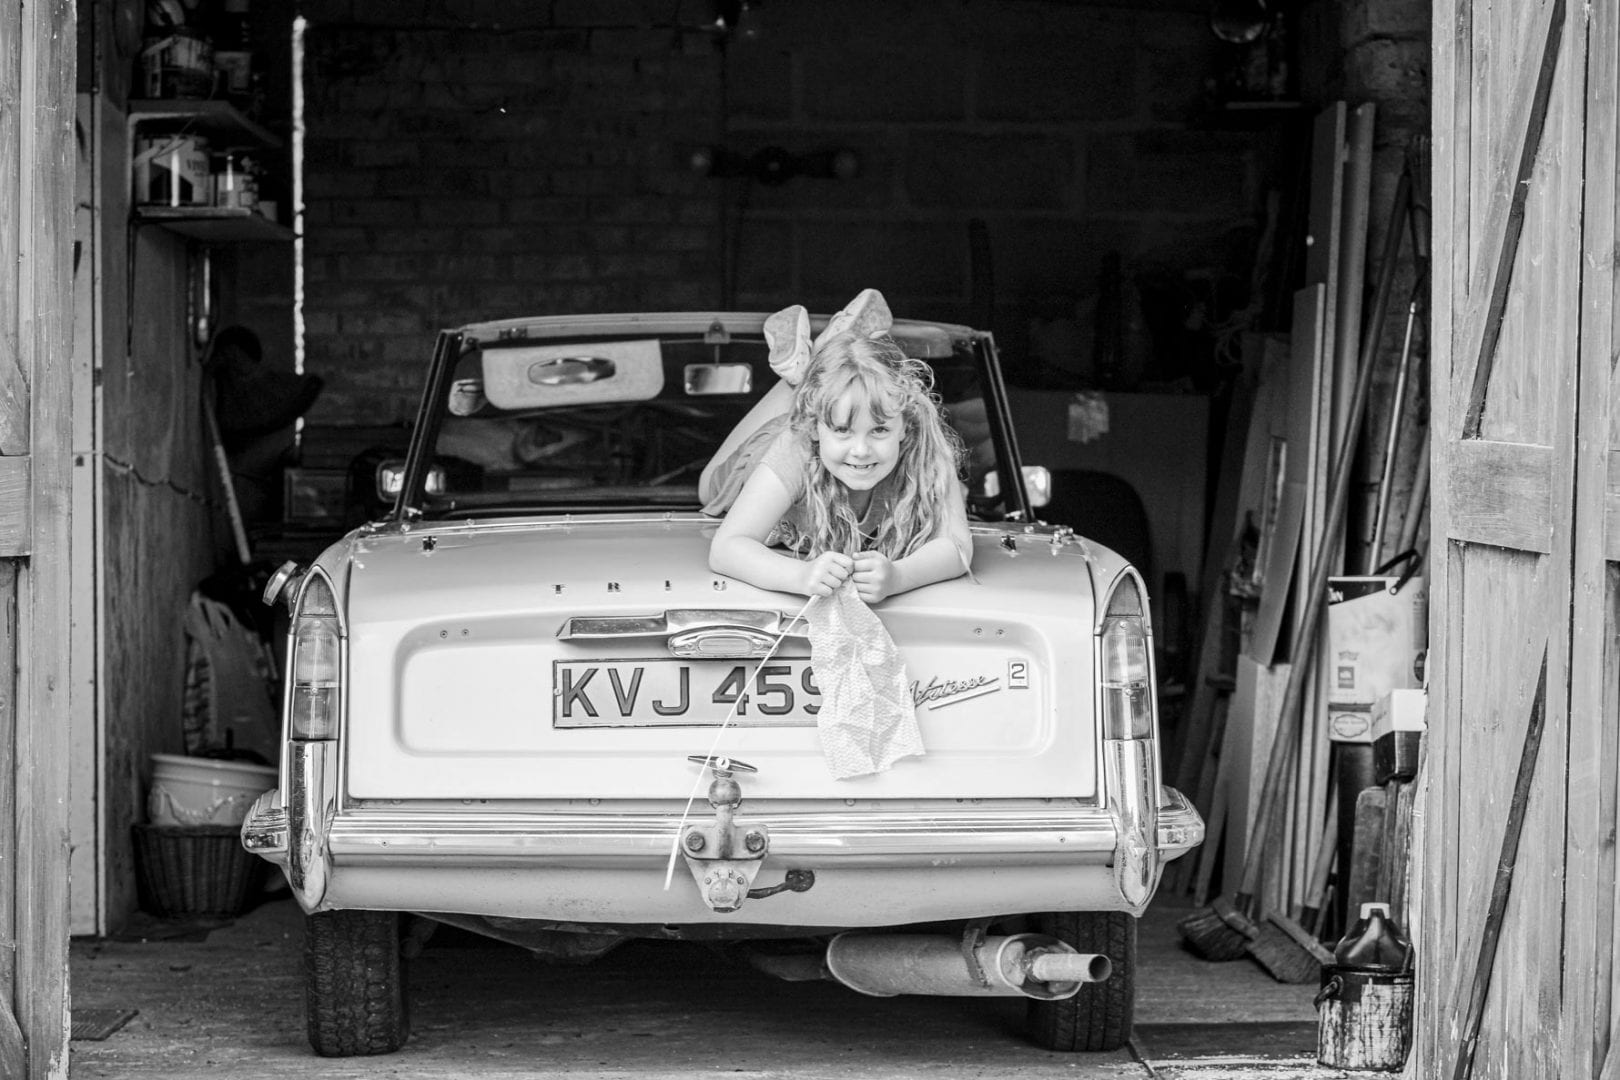 A young girl lies on the bonnet of a vintage car in the garage